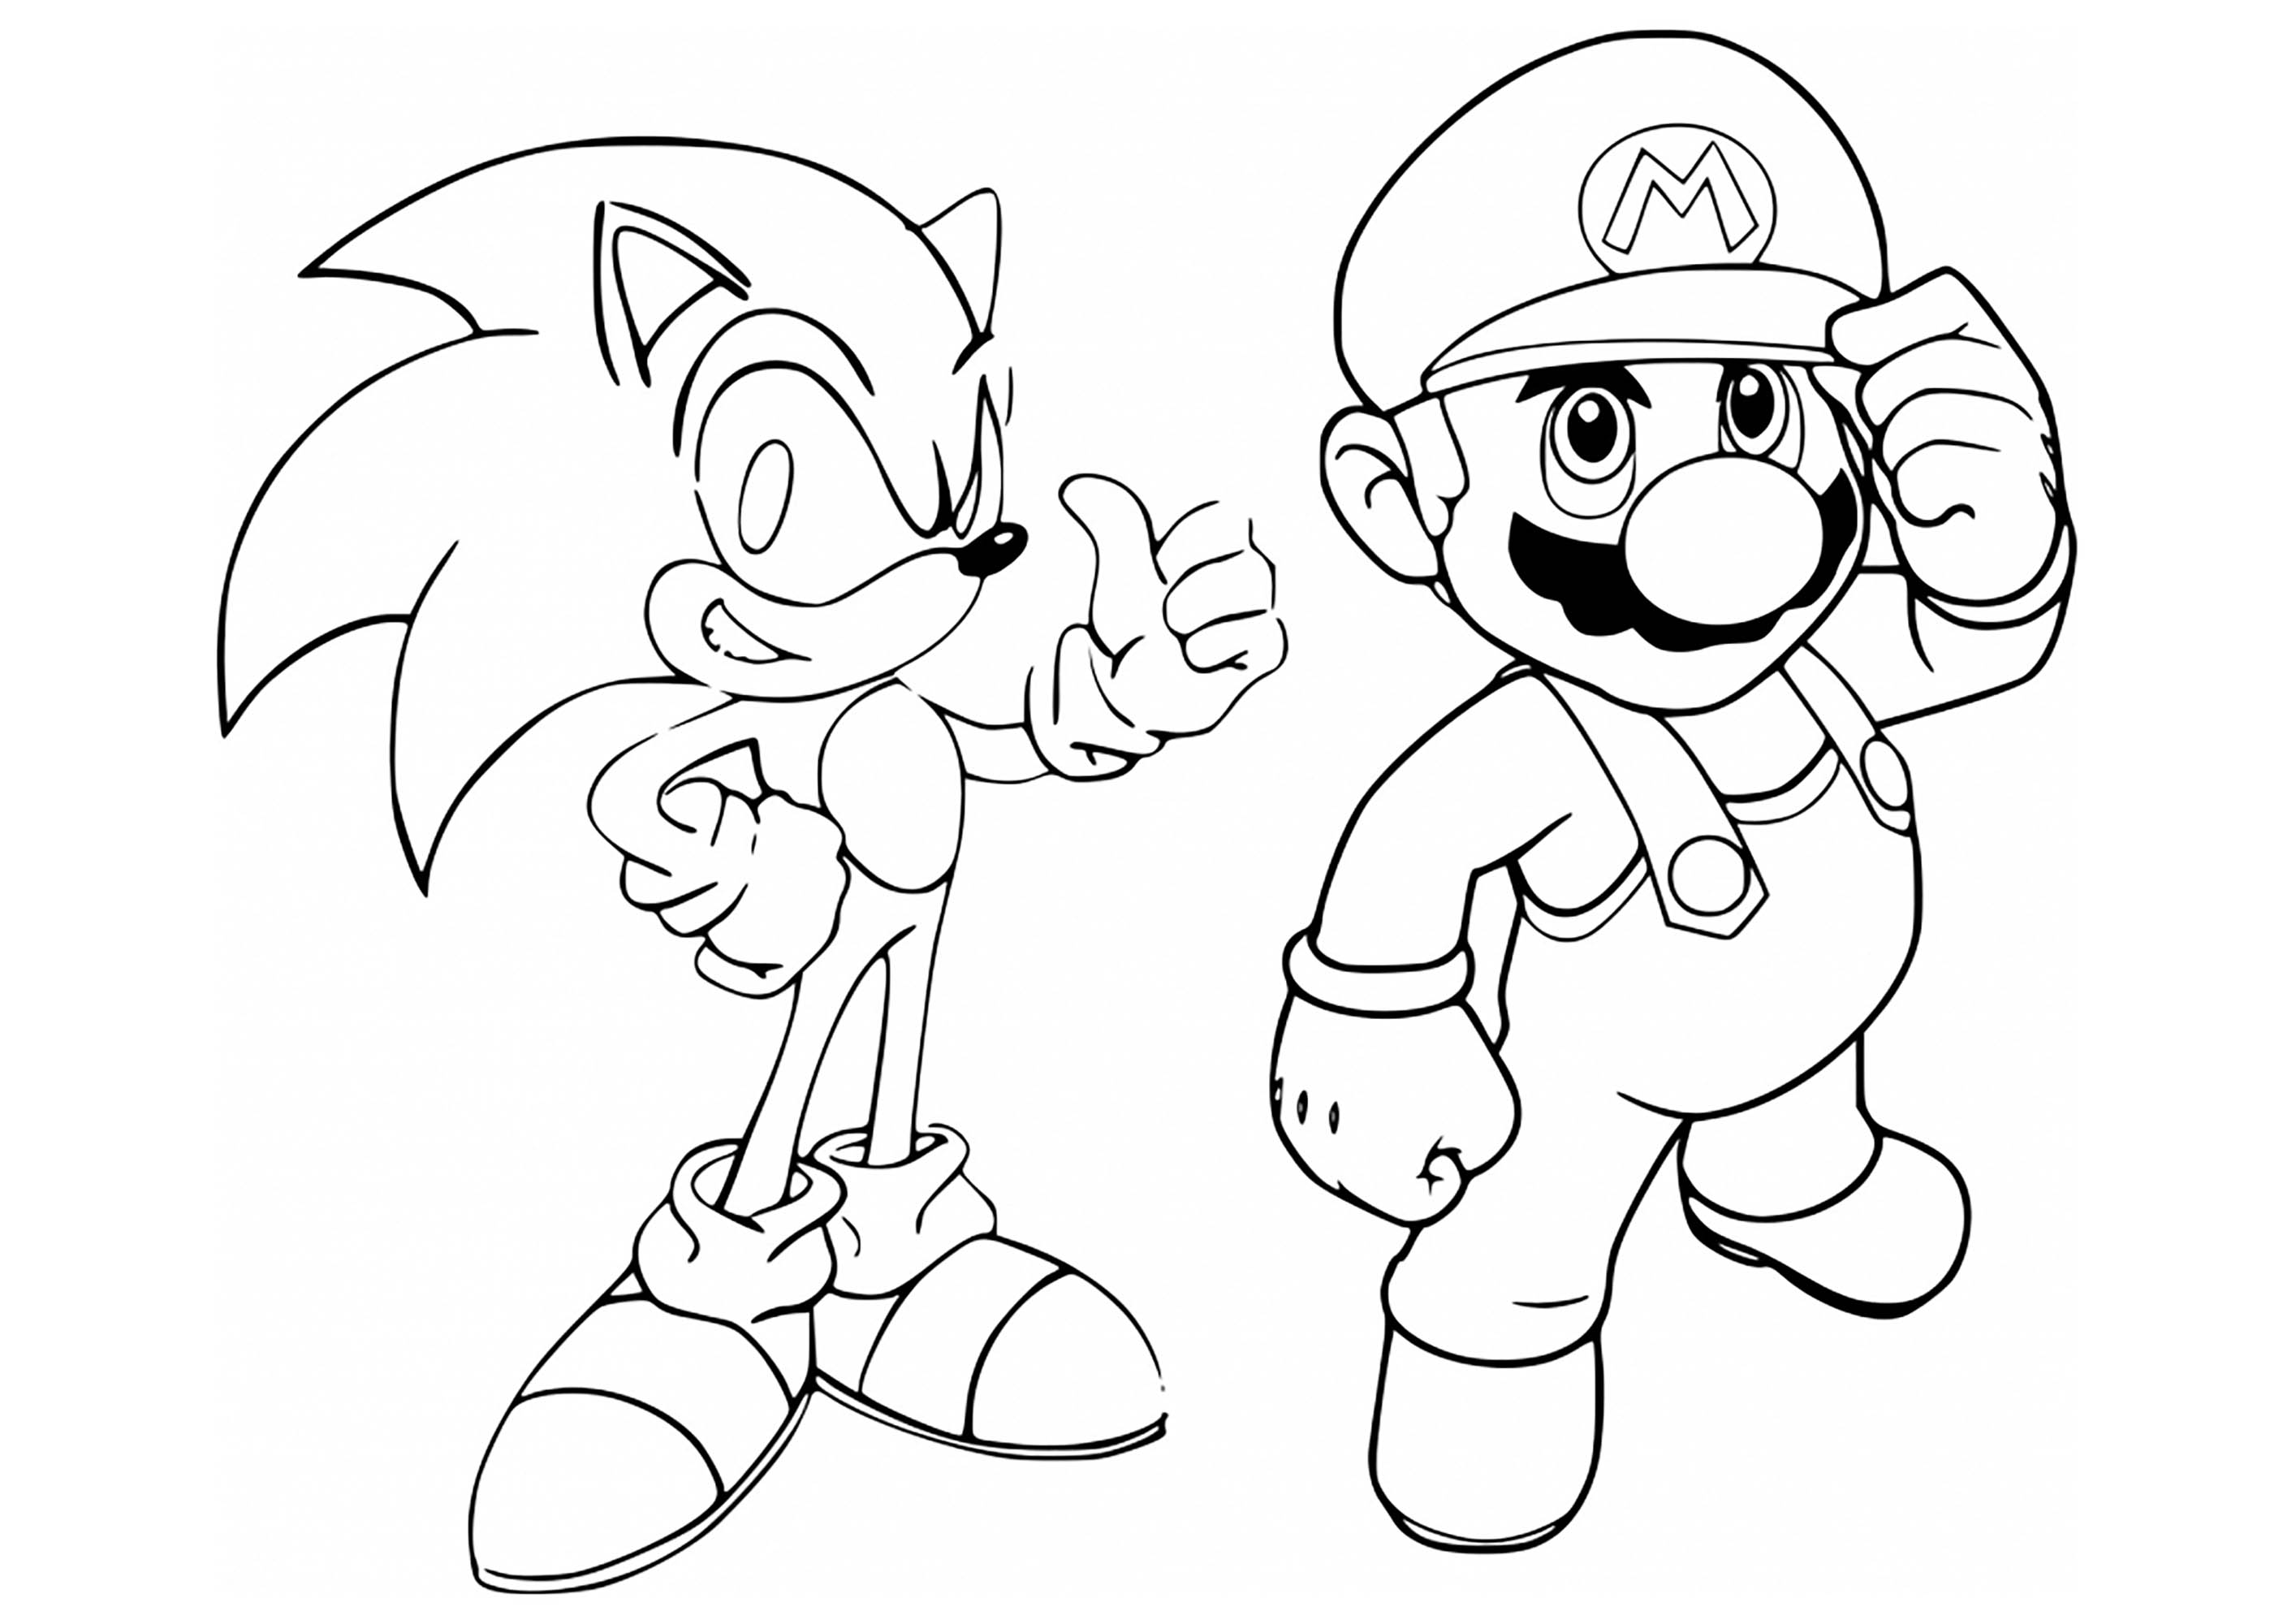 Sonic and Mario at the Olympic games Tokyo Coloring Page